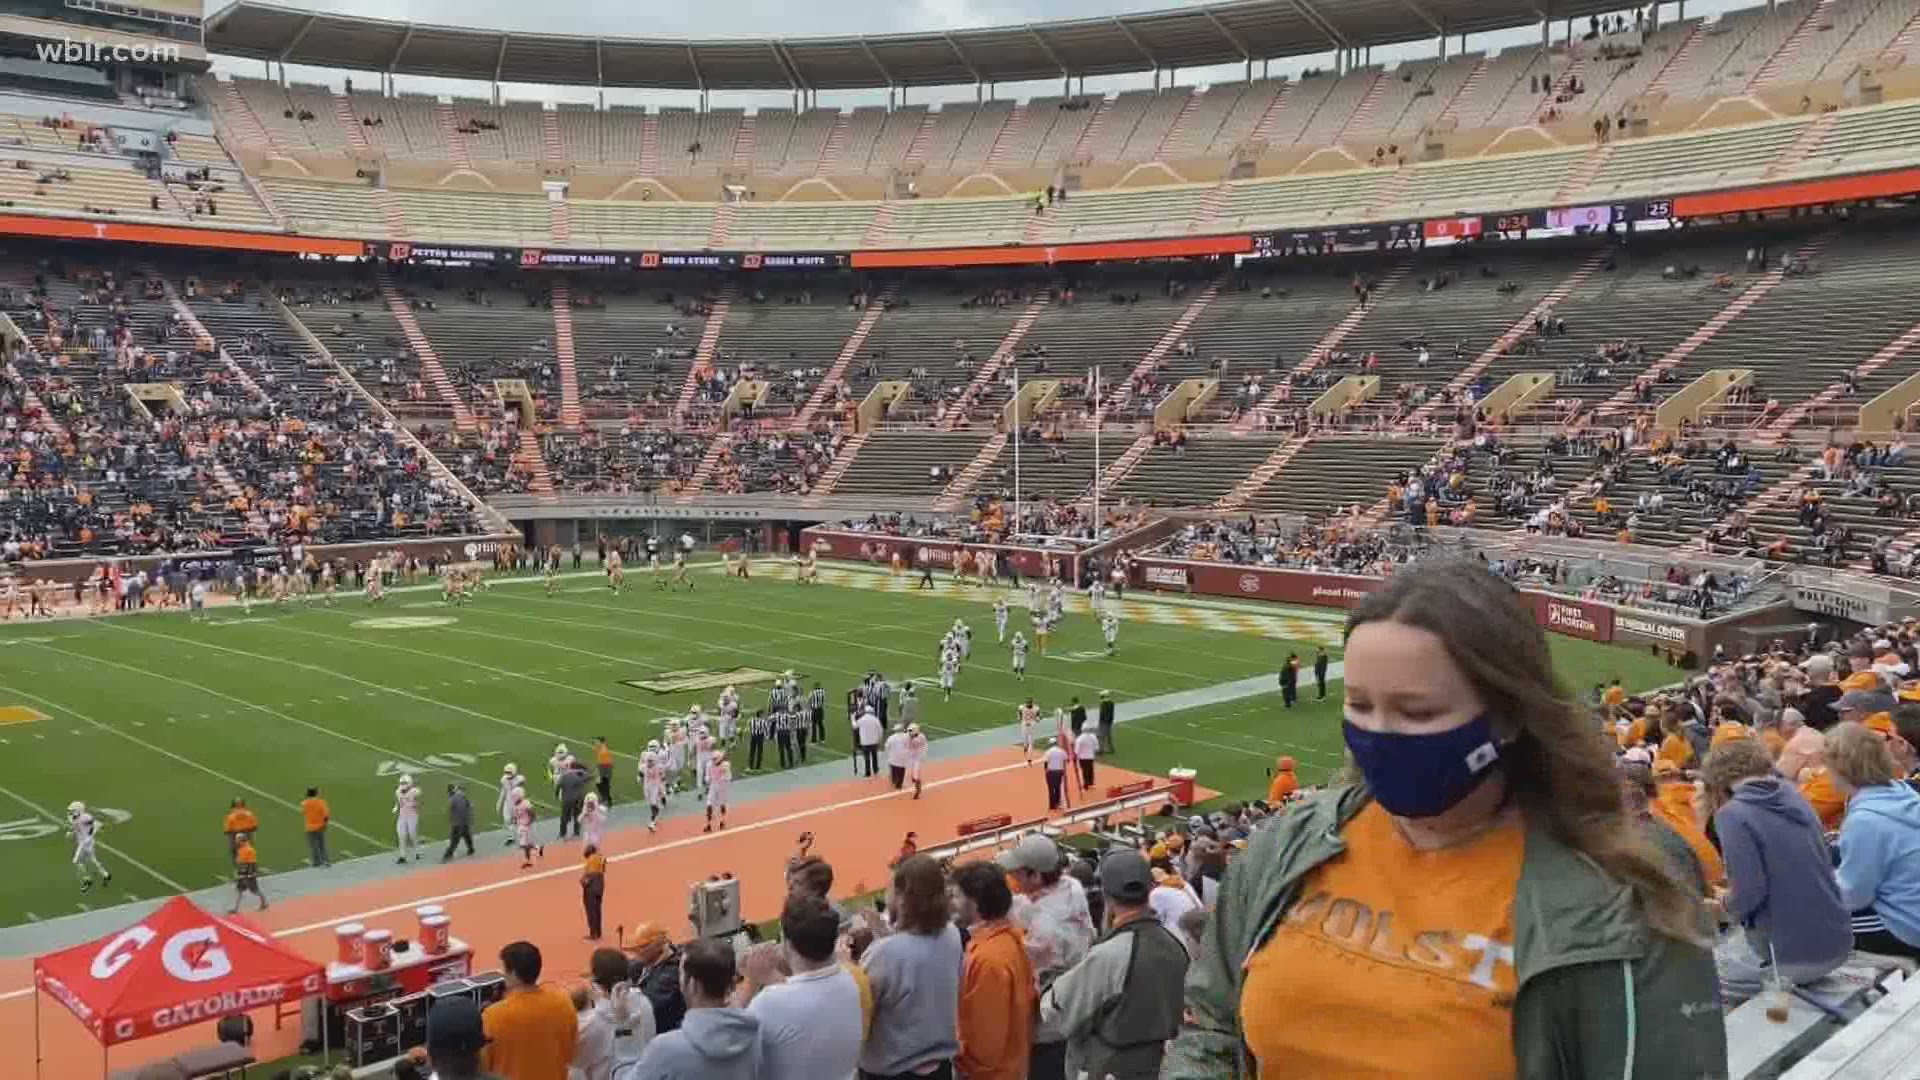 For many fans, this was the first time they returned to Neyland Stadium since the start of the COVID-19 pandemic.